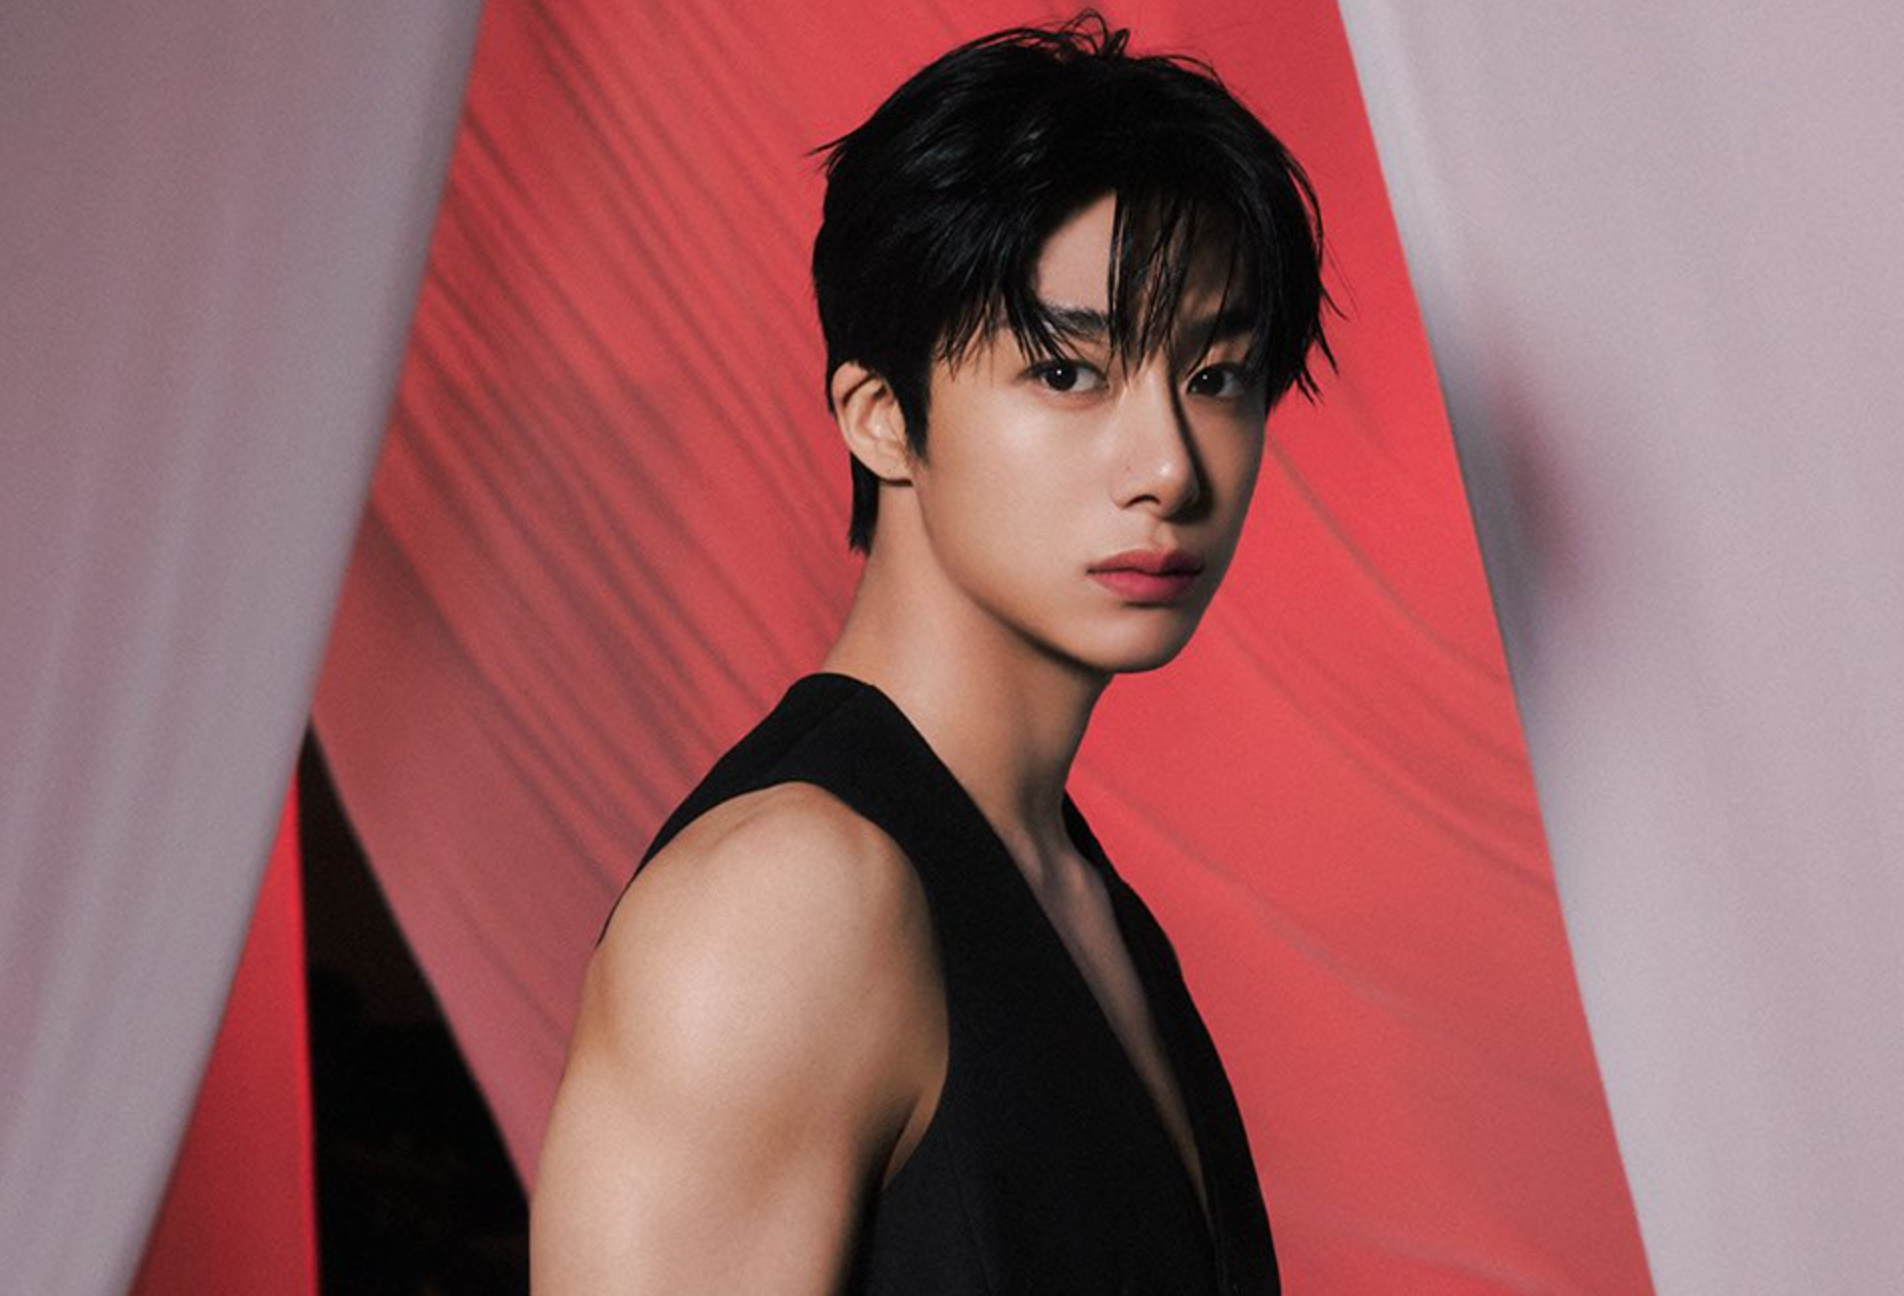 Chae Hyungwon is the new face of Givenchy Beauty